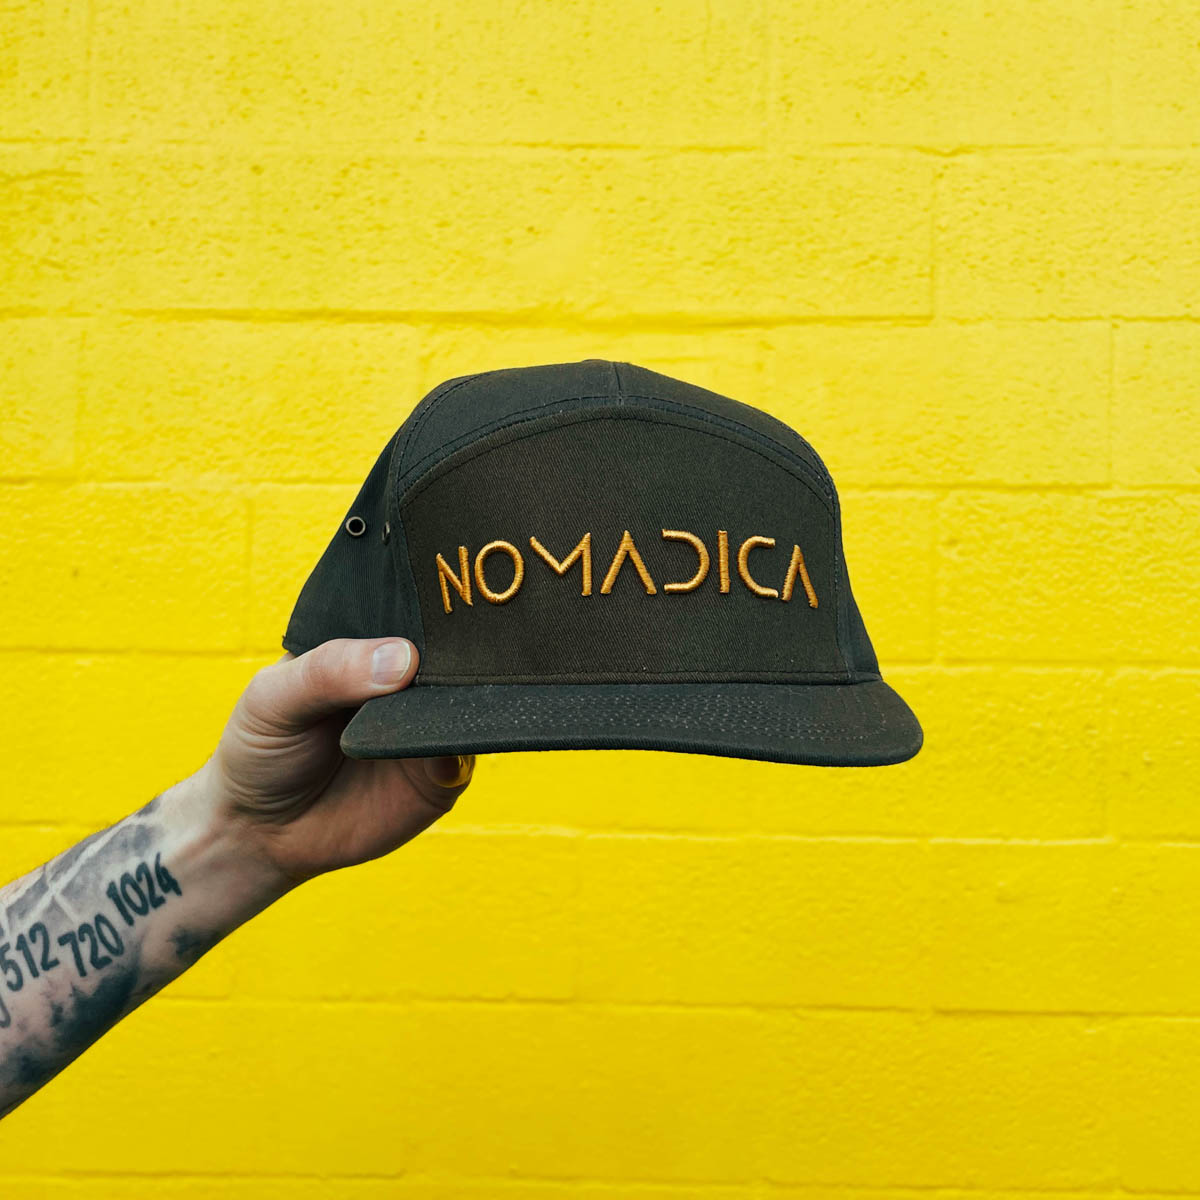 embroidered hat for nomadica